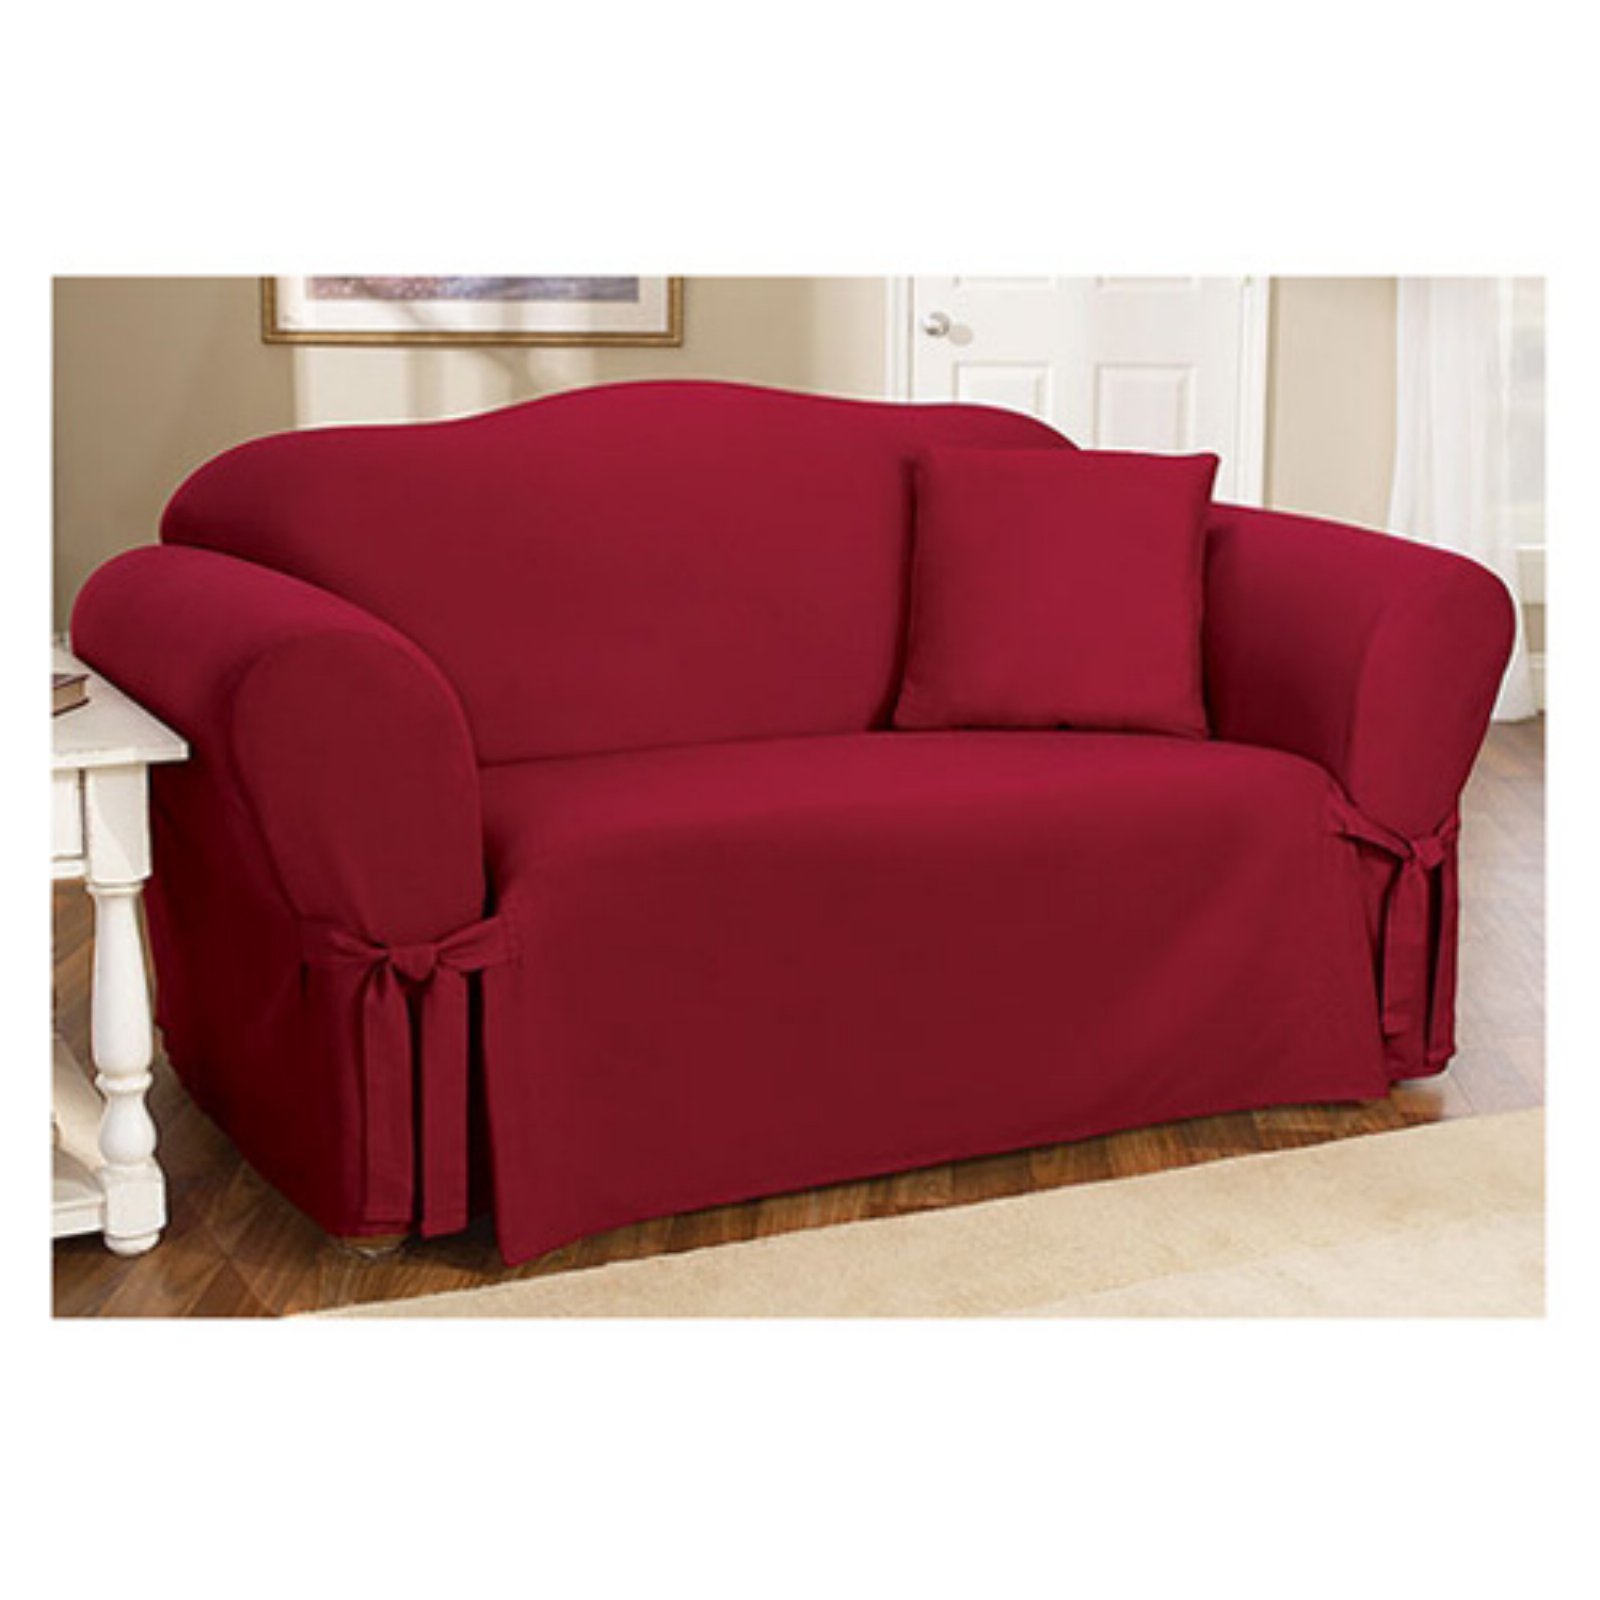 Sure Fit Cotton Duck Loveseat Slipcover - image 2 of 2